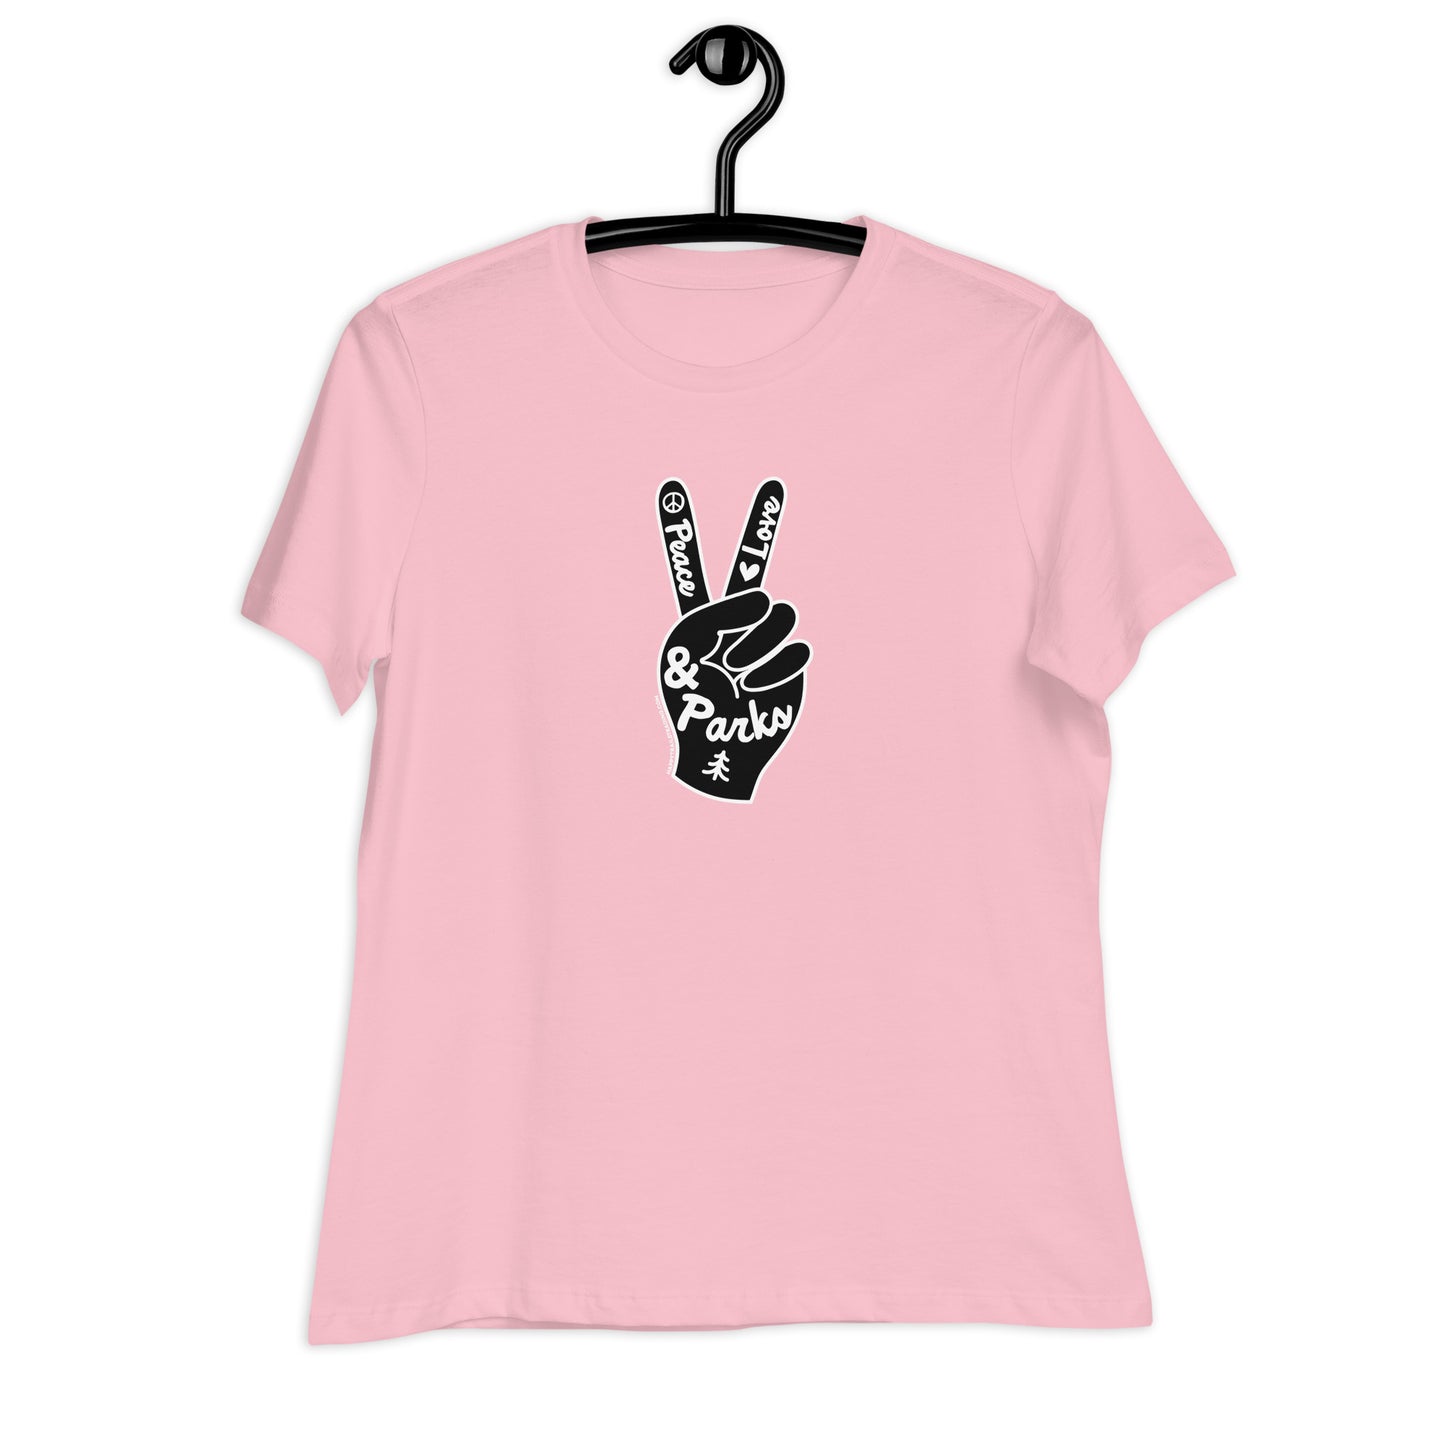 Peace, Love & Parks - Women's Relaxed T-Shirt